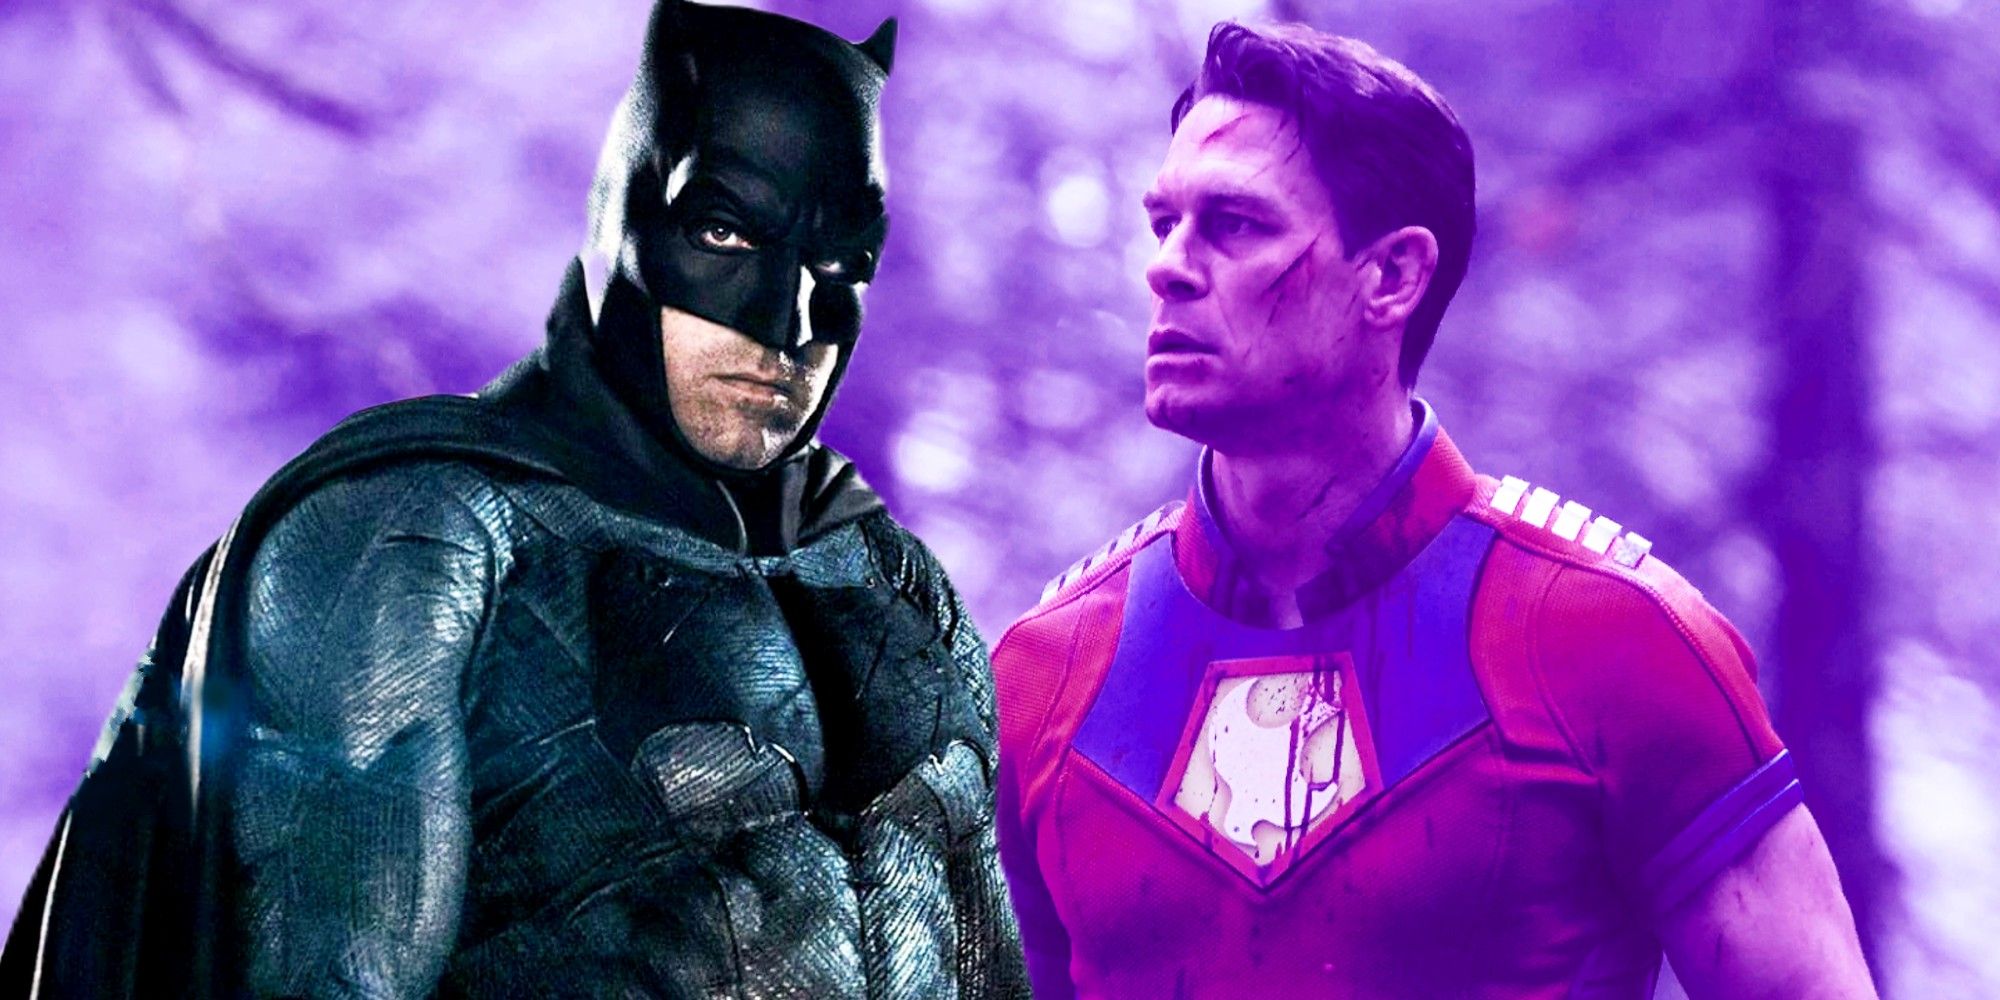 peacemaker confirms DCU Batman's no-kill rules, blended image with Ben Affleck's Batman standing in front of Peacemaker